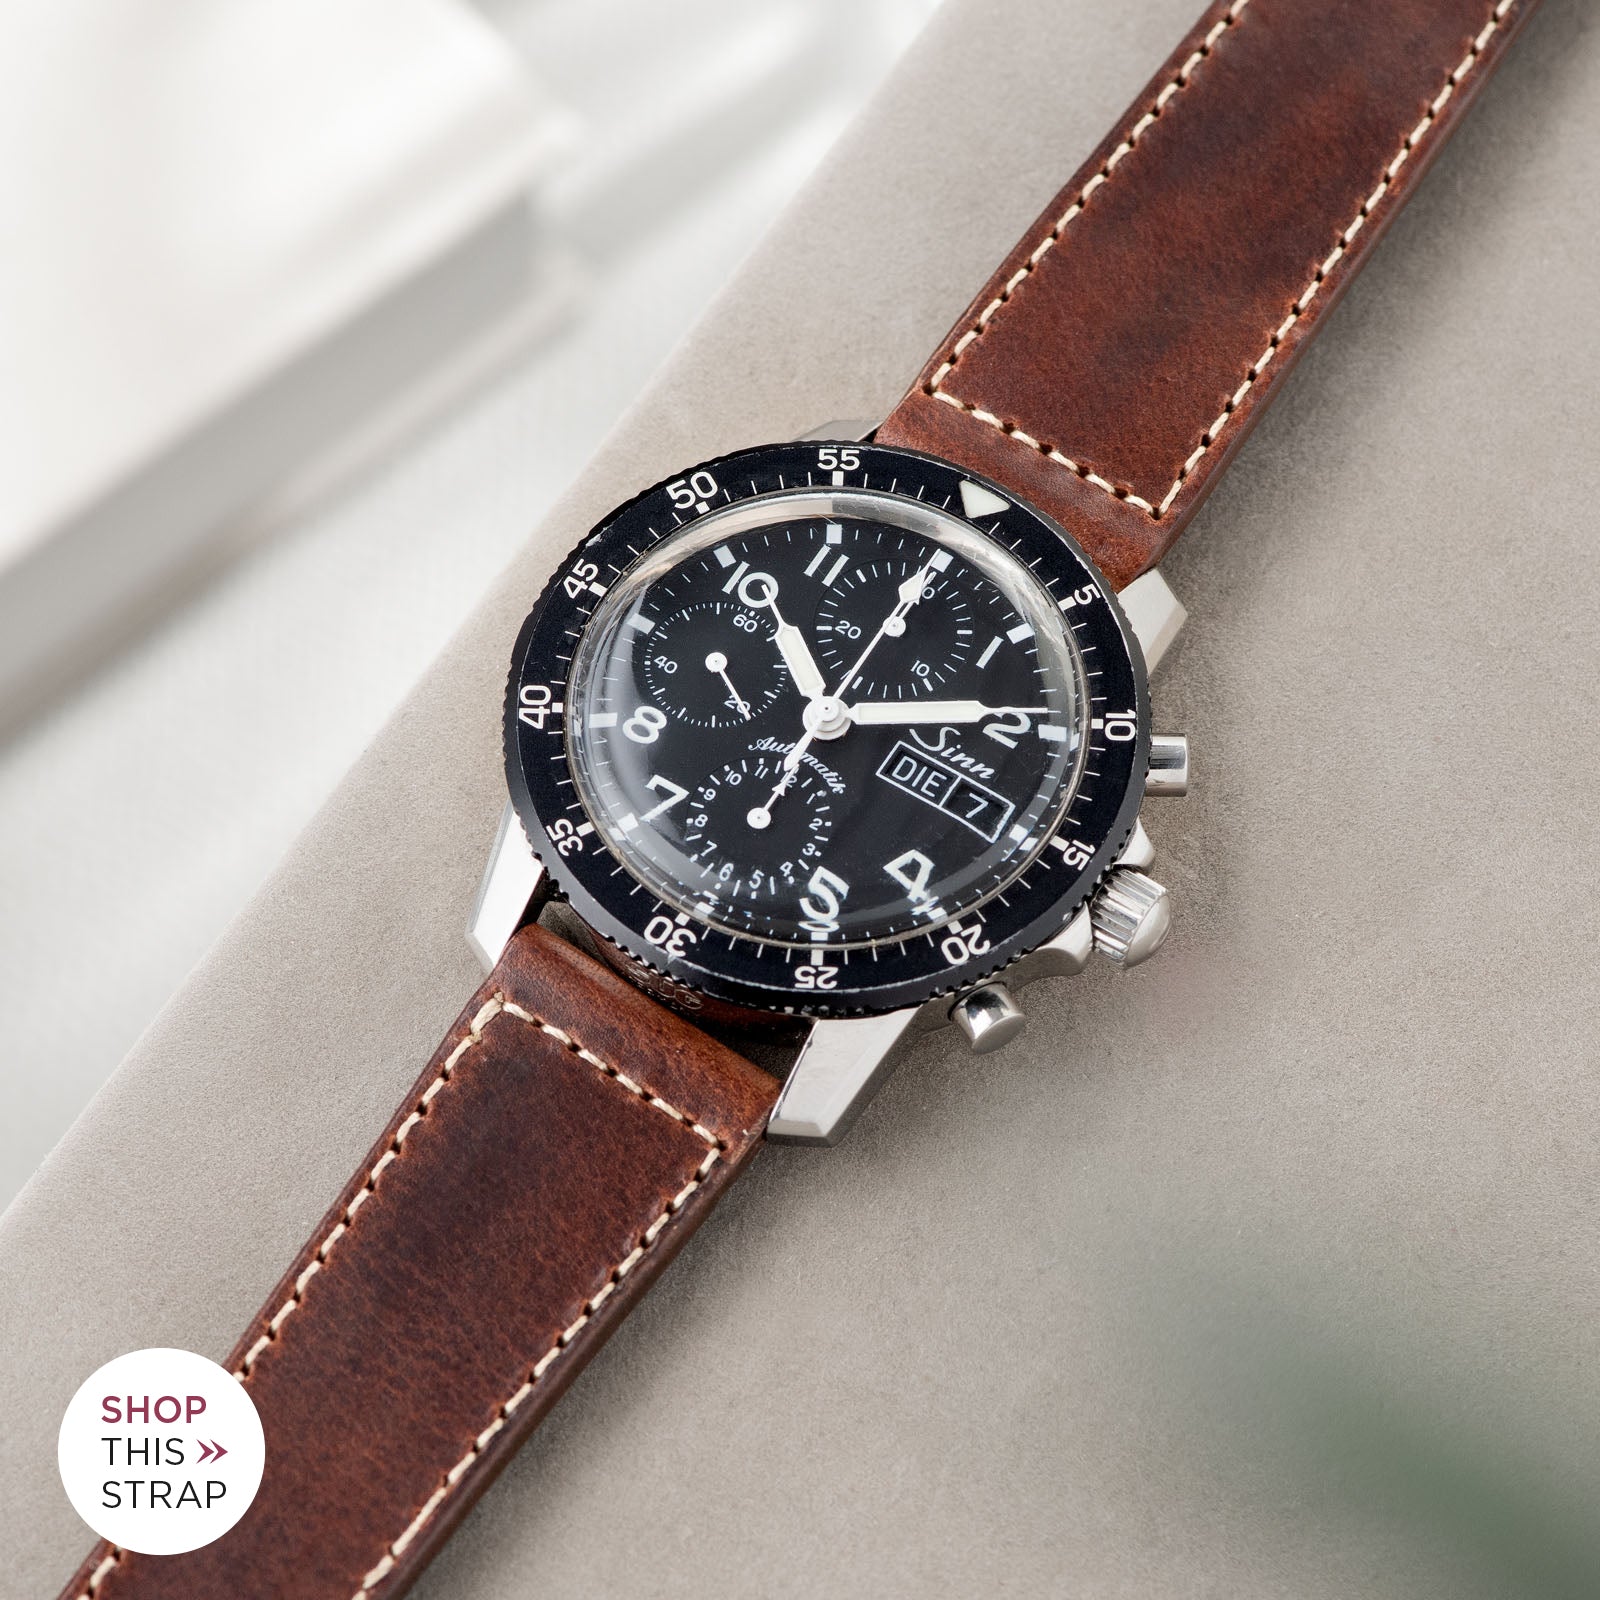 Bulang and Sons_Strap Guide_Sinn 103St Flieder Chronograph_Siena Brown Boxed Stitch Leather Watch Strap